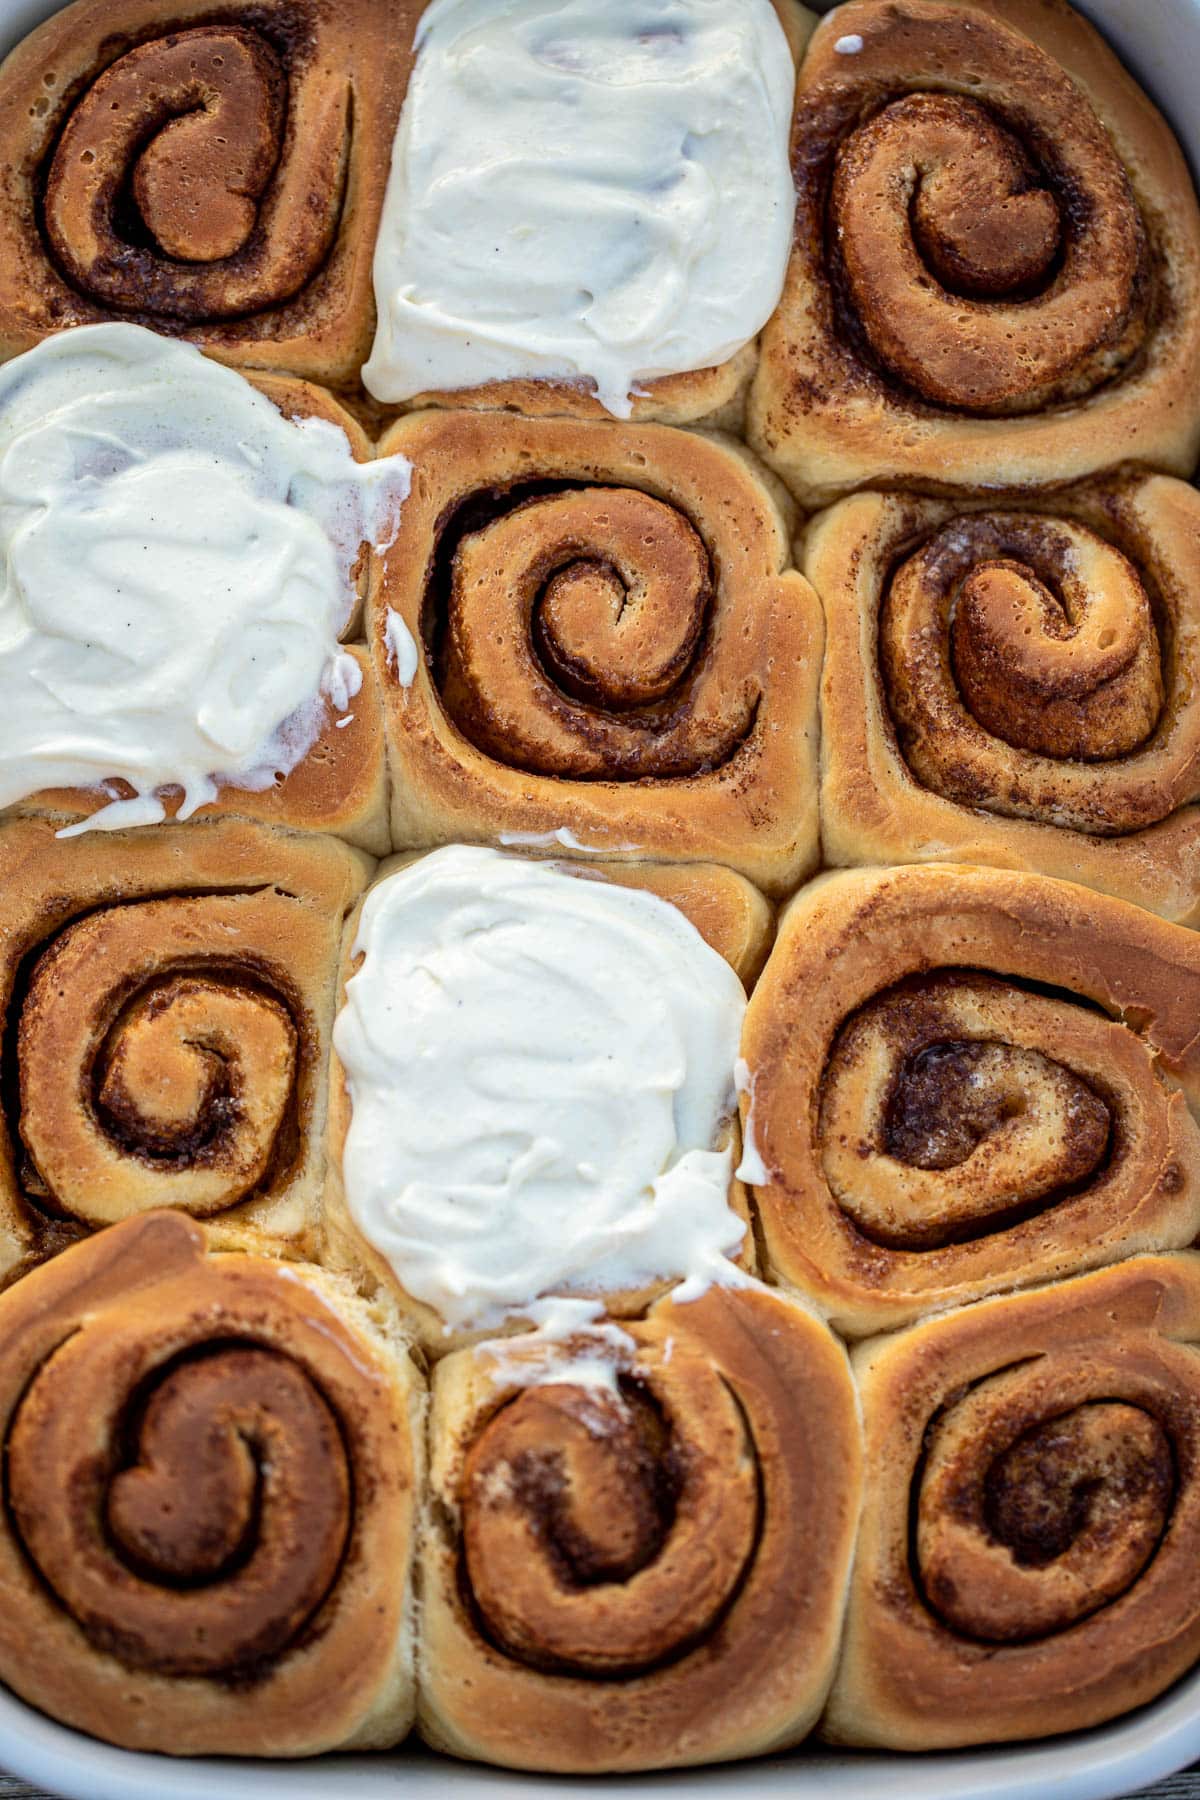 Cinnamon Rolls With Cream Cheese Frosting (VIDEO)